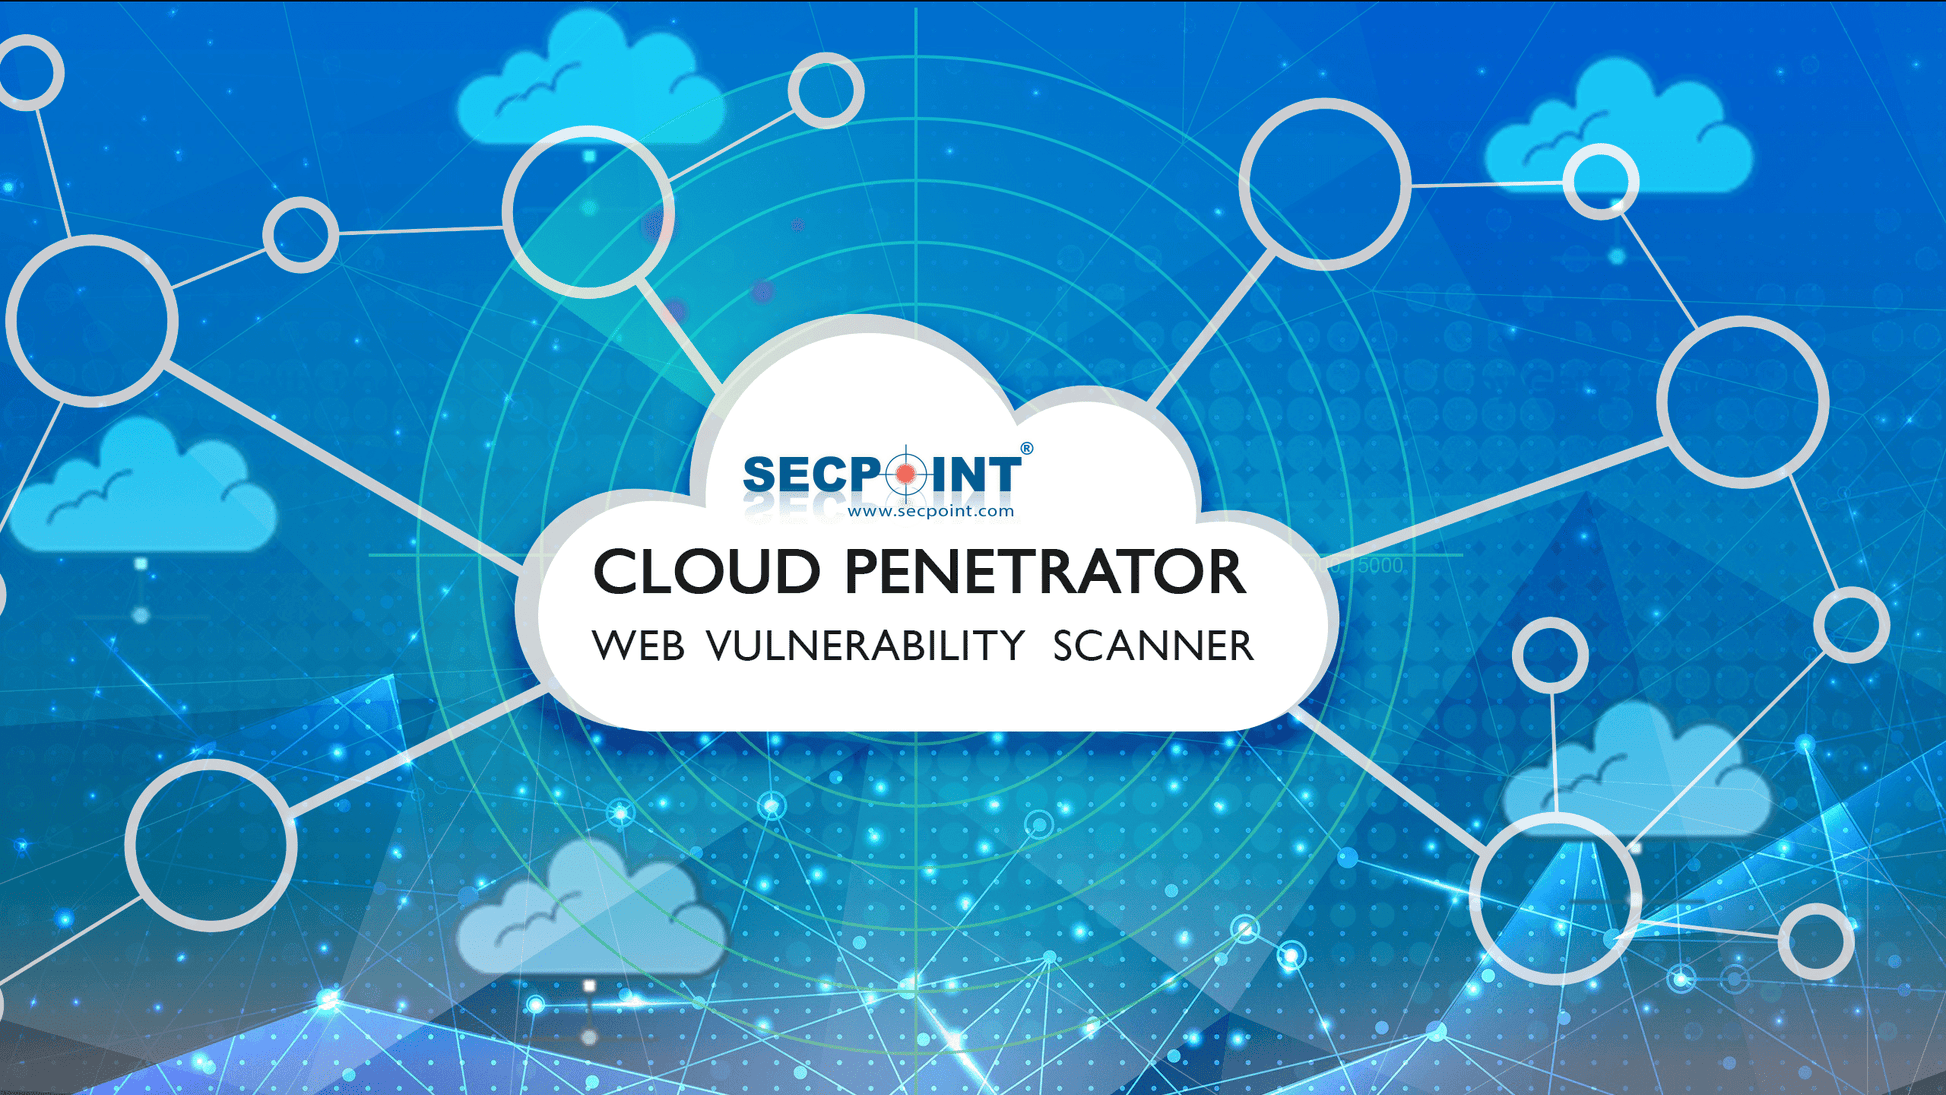 SecPoint Cloud Penetrator S9 - Vulnerability Scanning of 1 IP Static Scan License for 3 Years - SecPoint